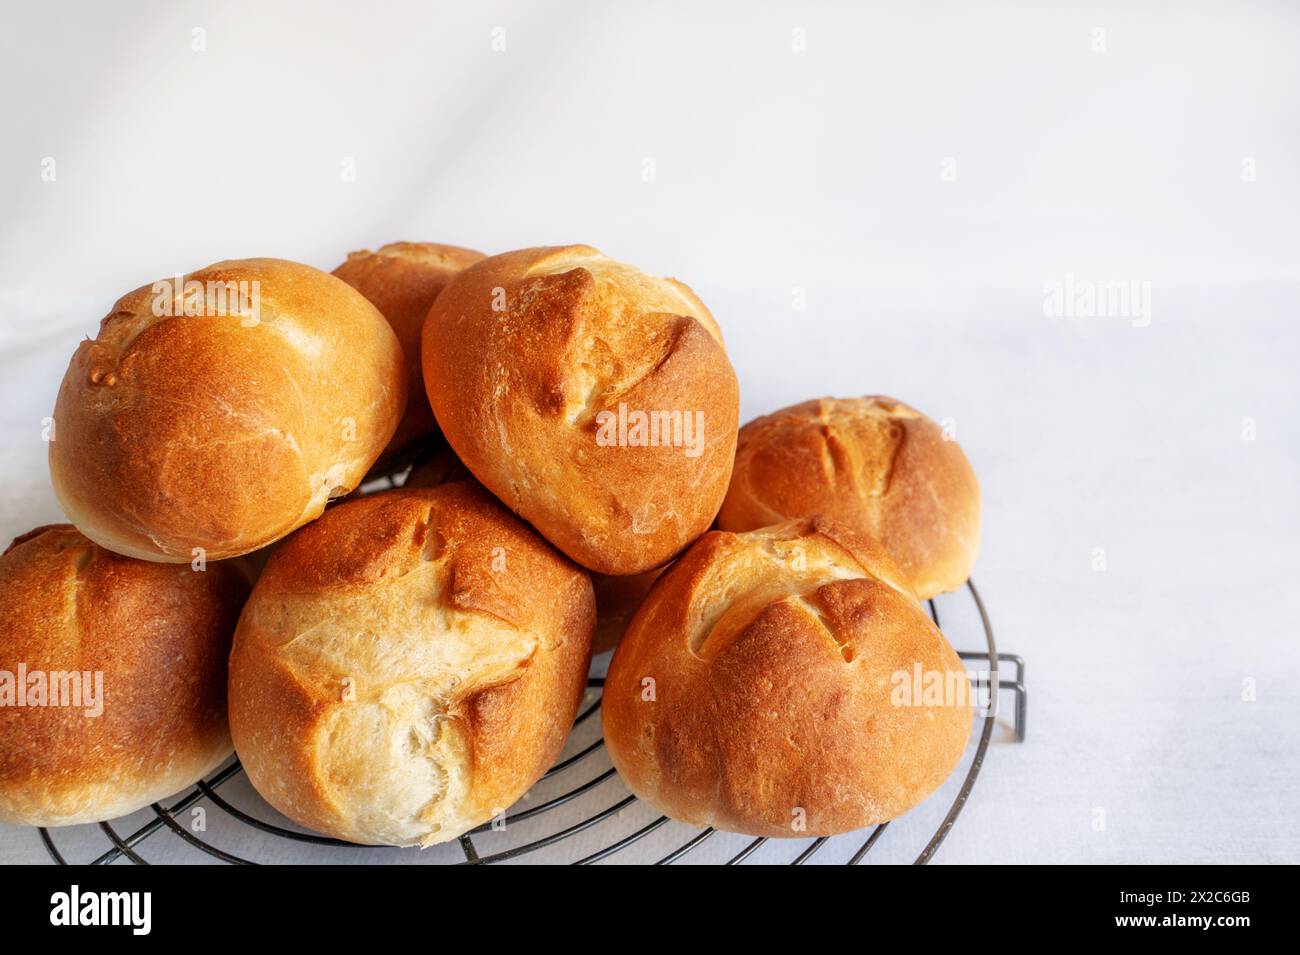 homemade buns. Homemade buns on wood board with wheat ears. Homemade Dinner Rolls, selective focus. Close-up. Copy space Stock Photo